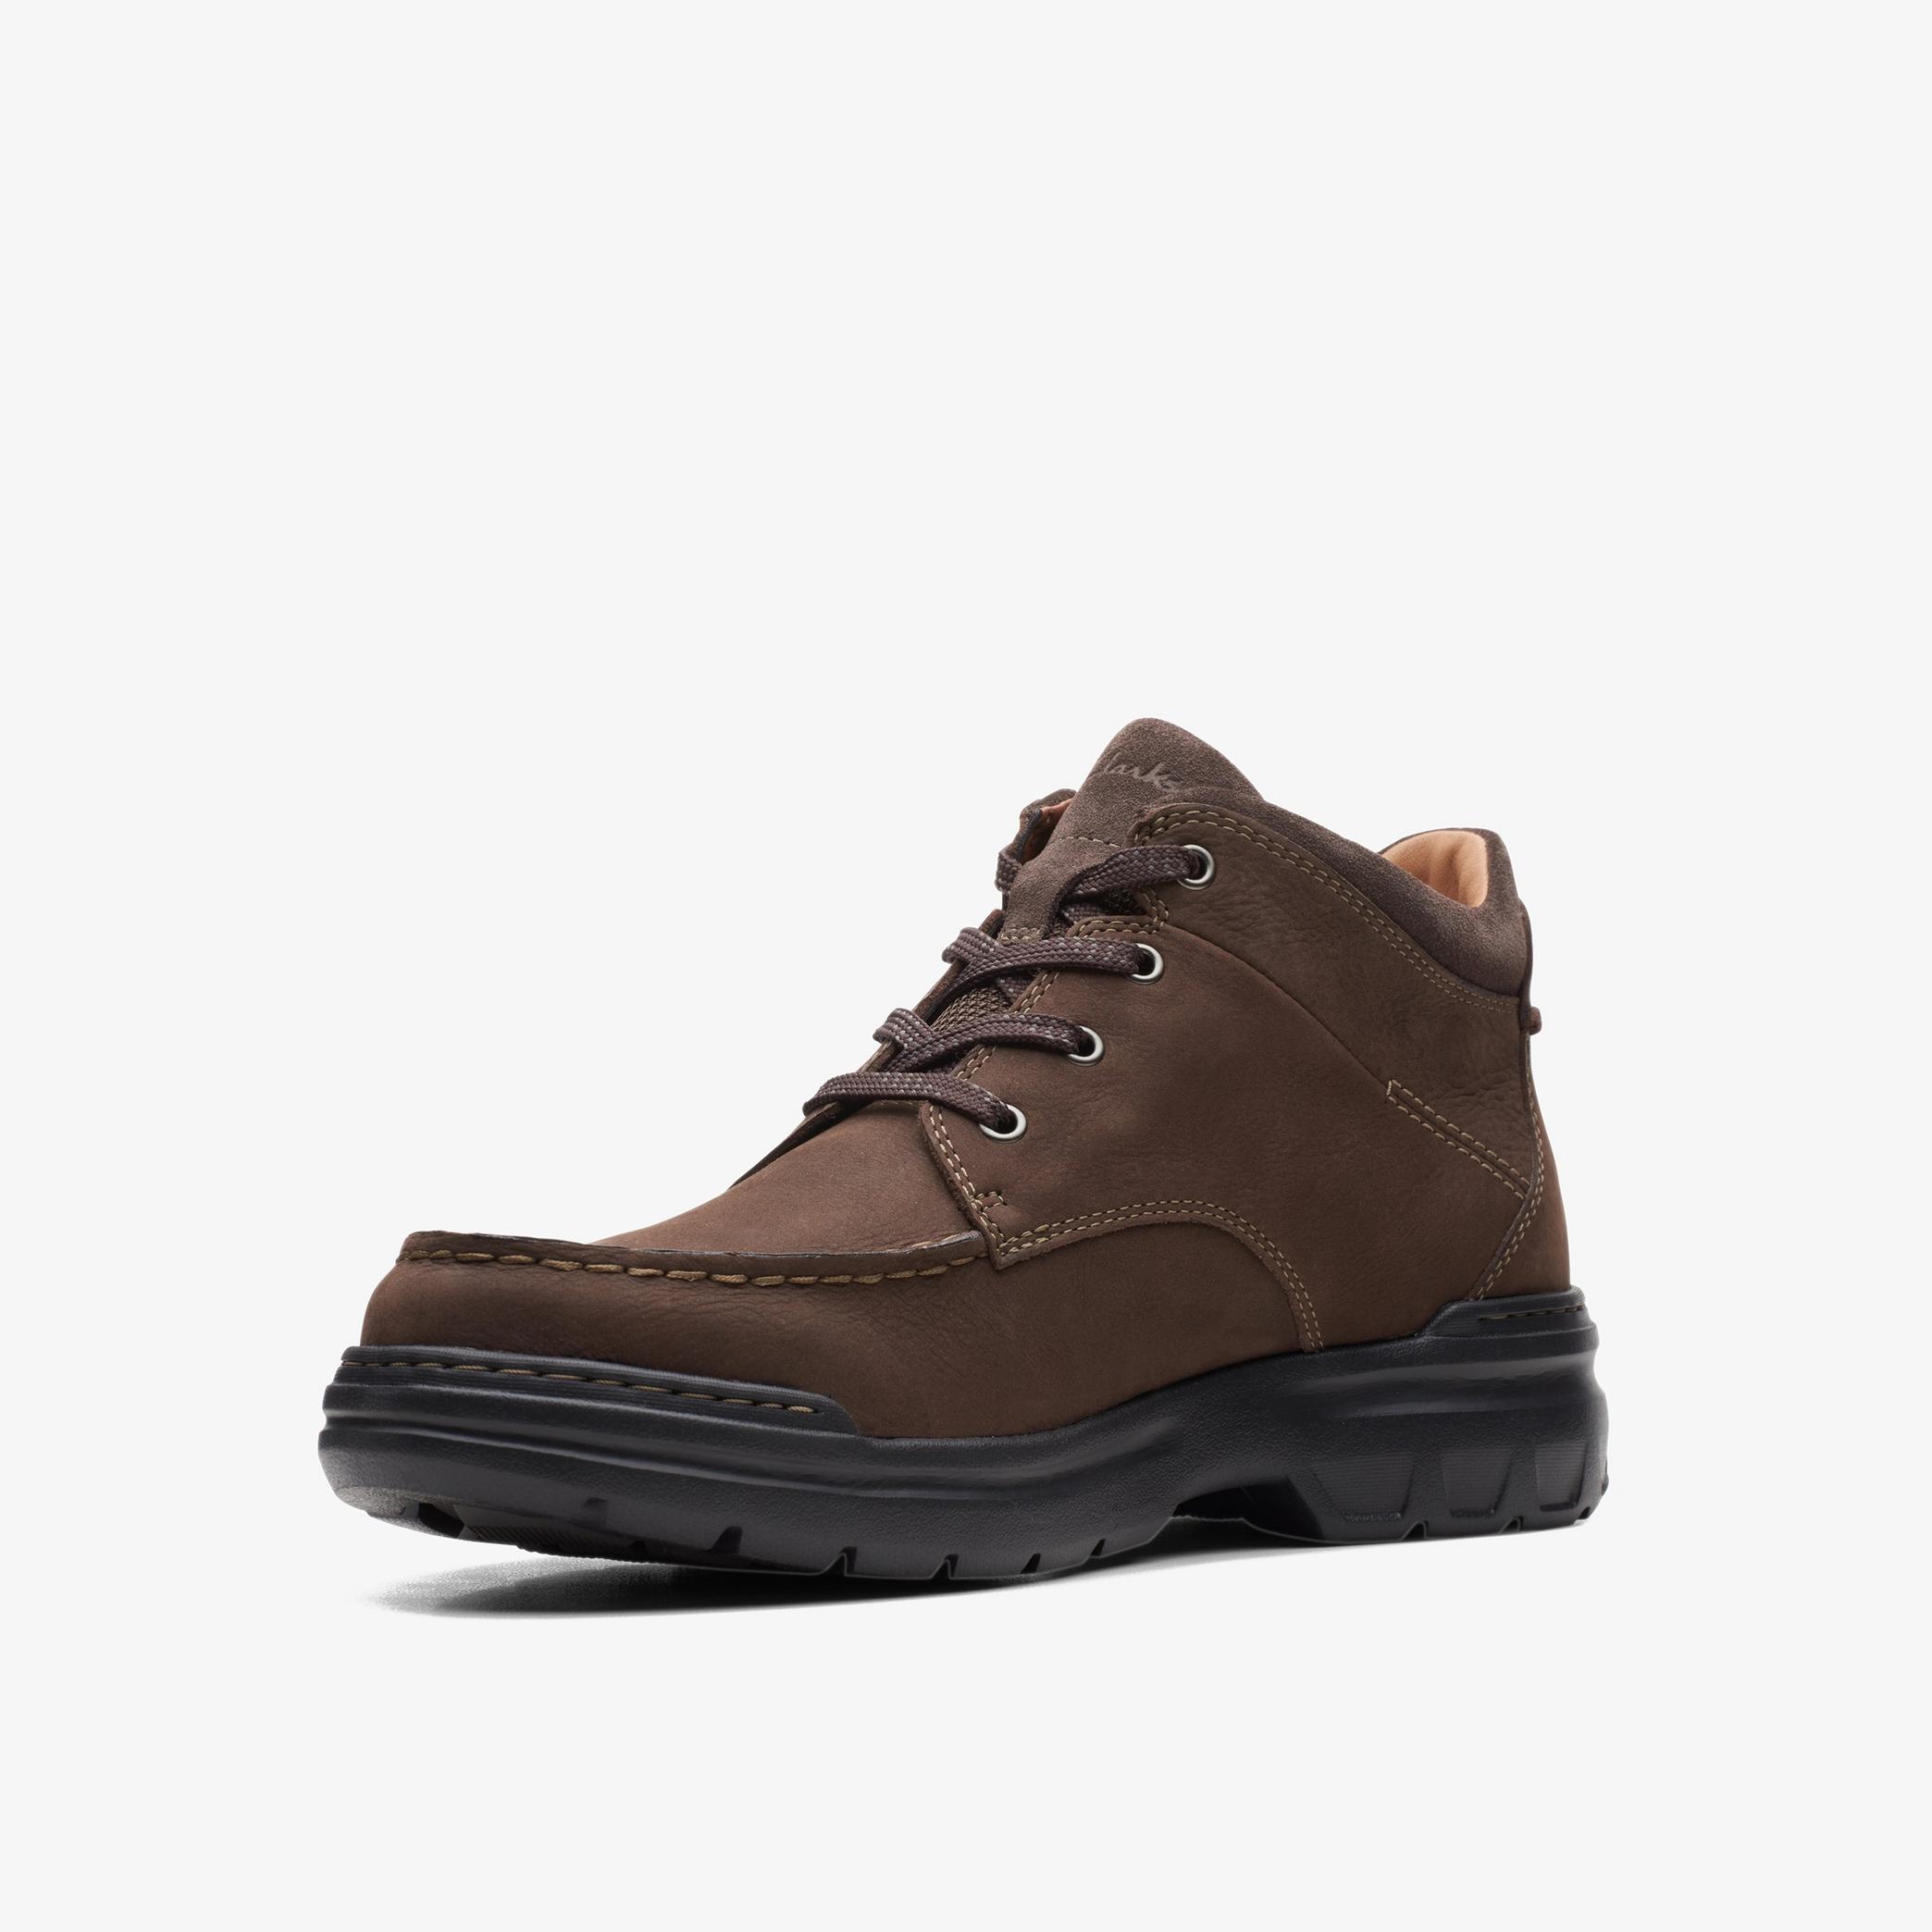 MENS Rockie 2 Hi GORE-TEX Brown Nubuck Ankle Boots | Clarks Outlet